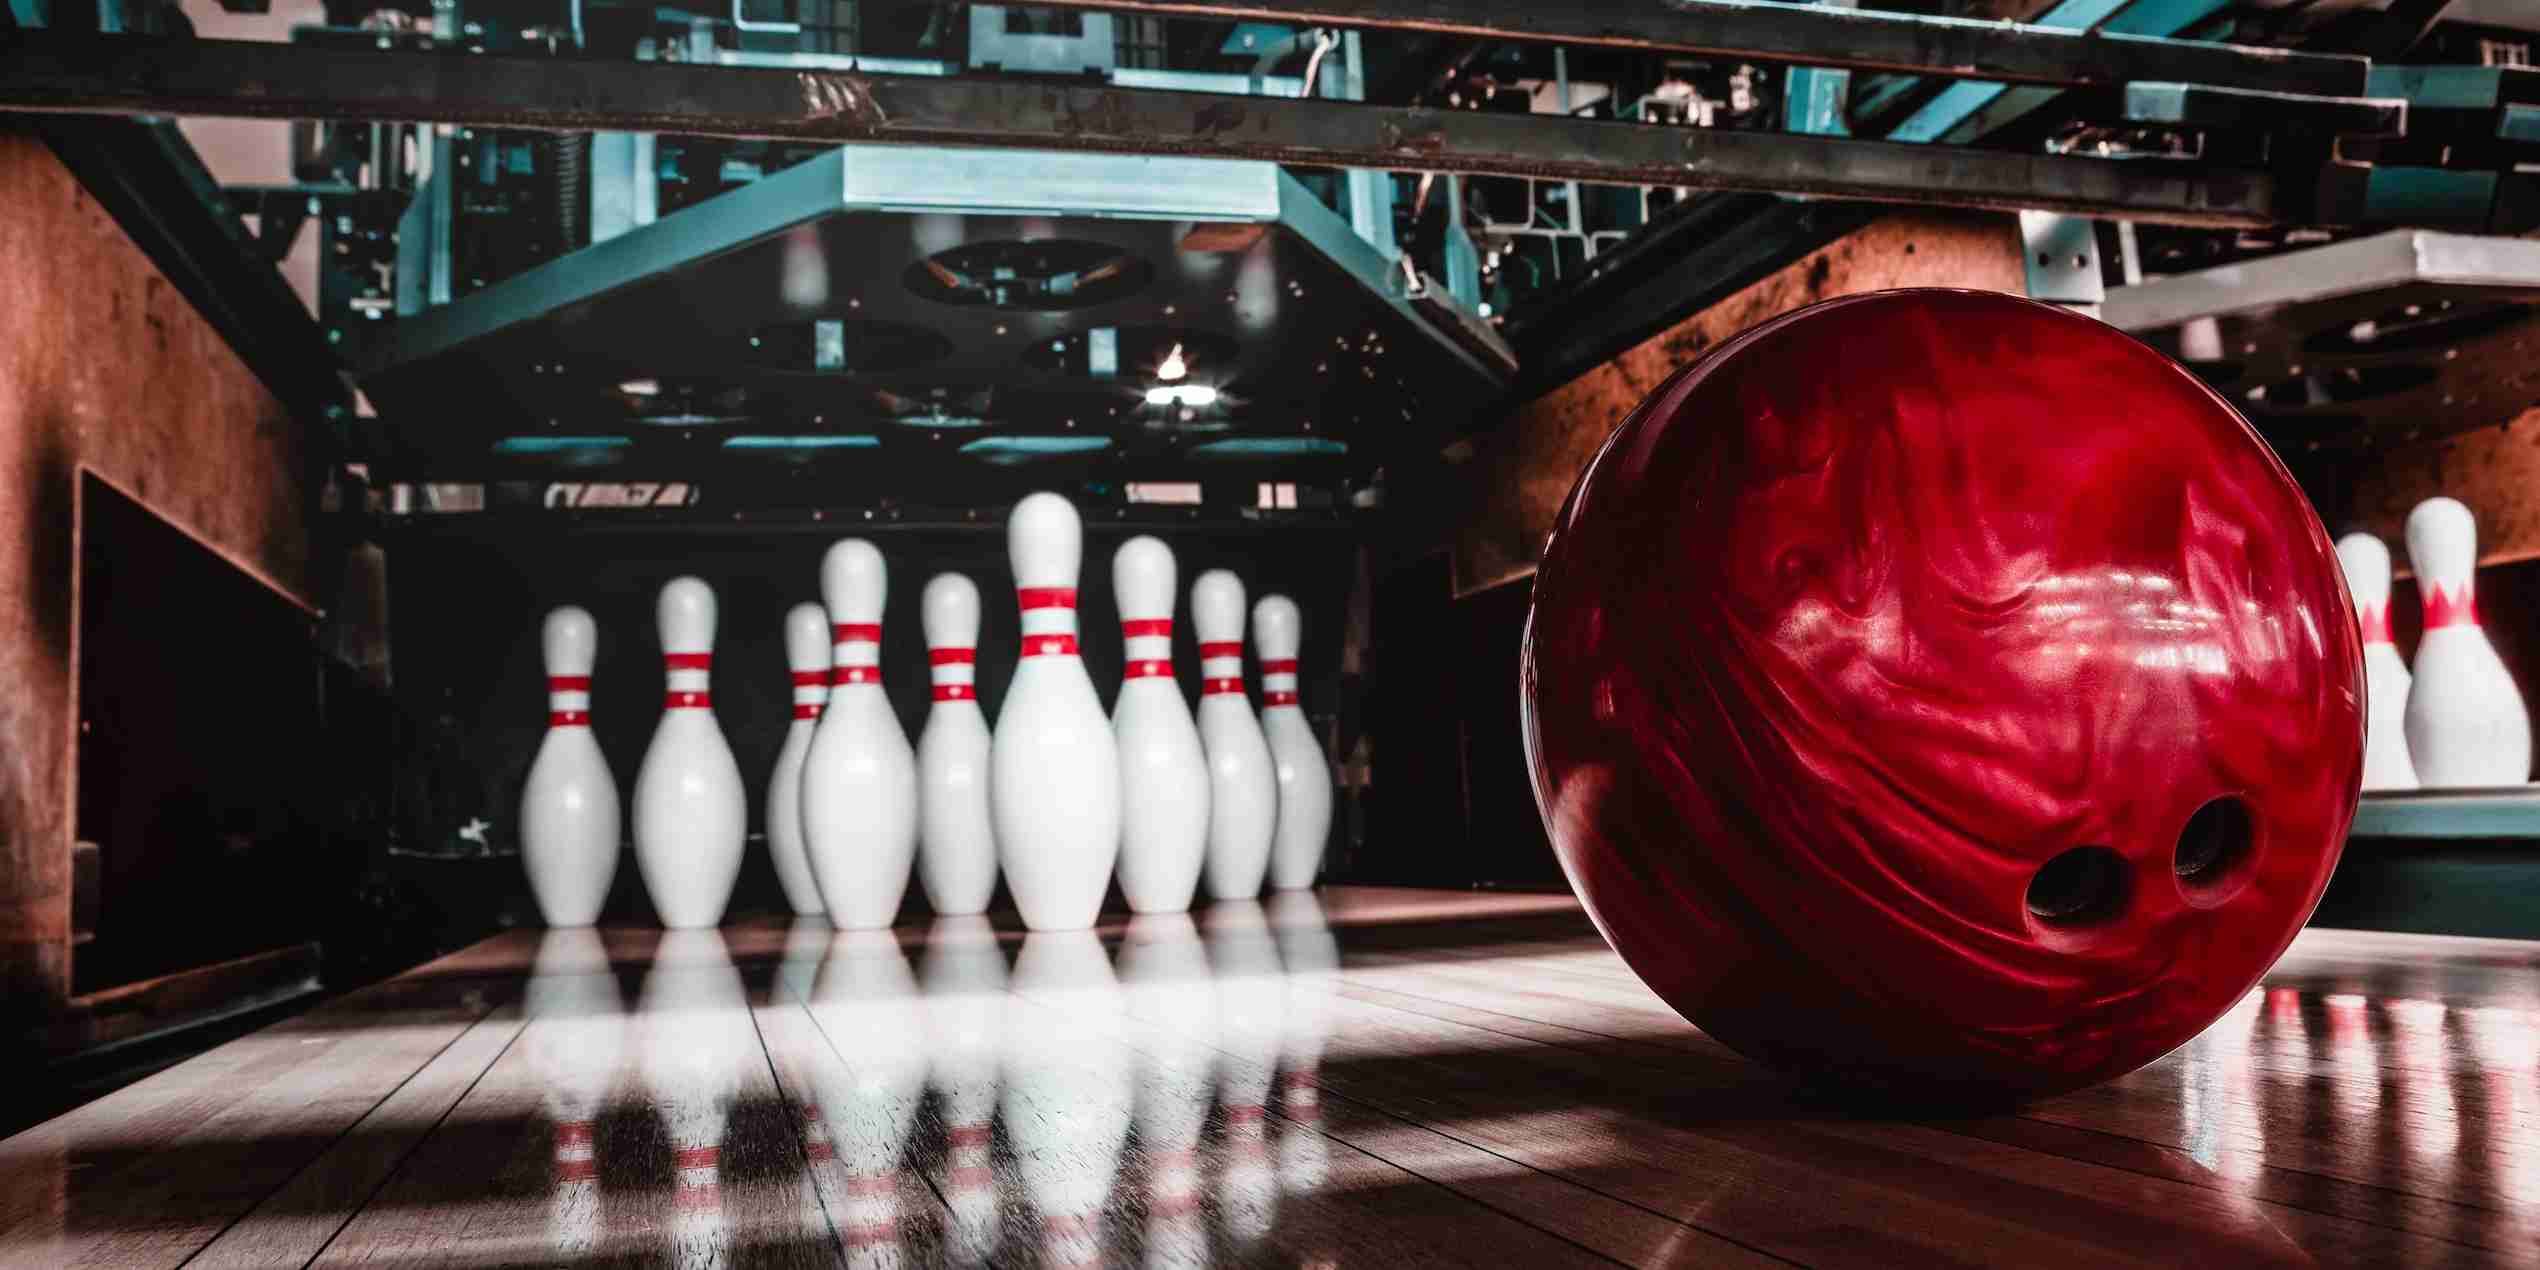 View full case study: The Bowling Experts™ meet the IT Experts